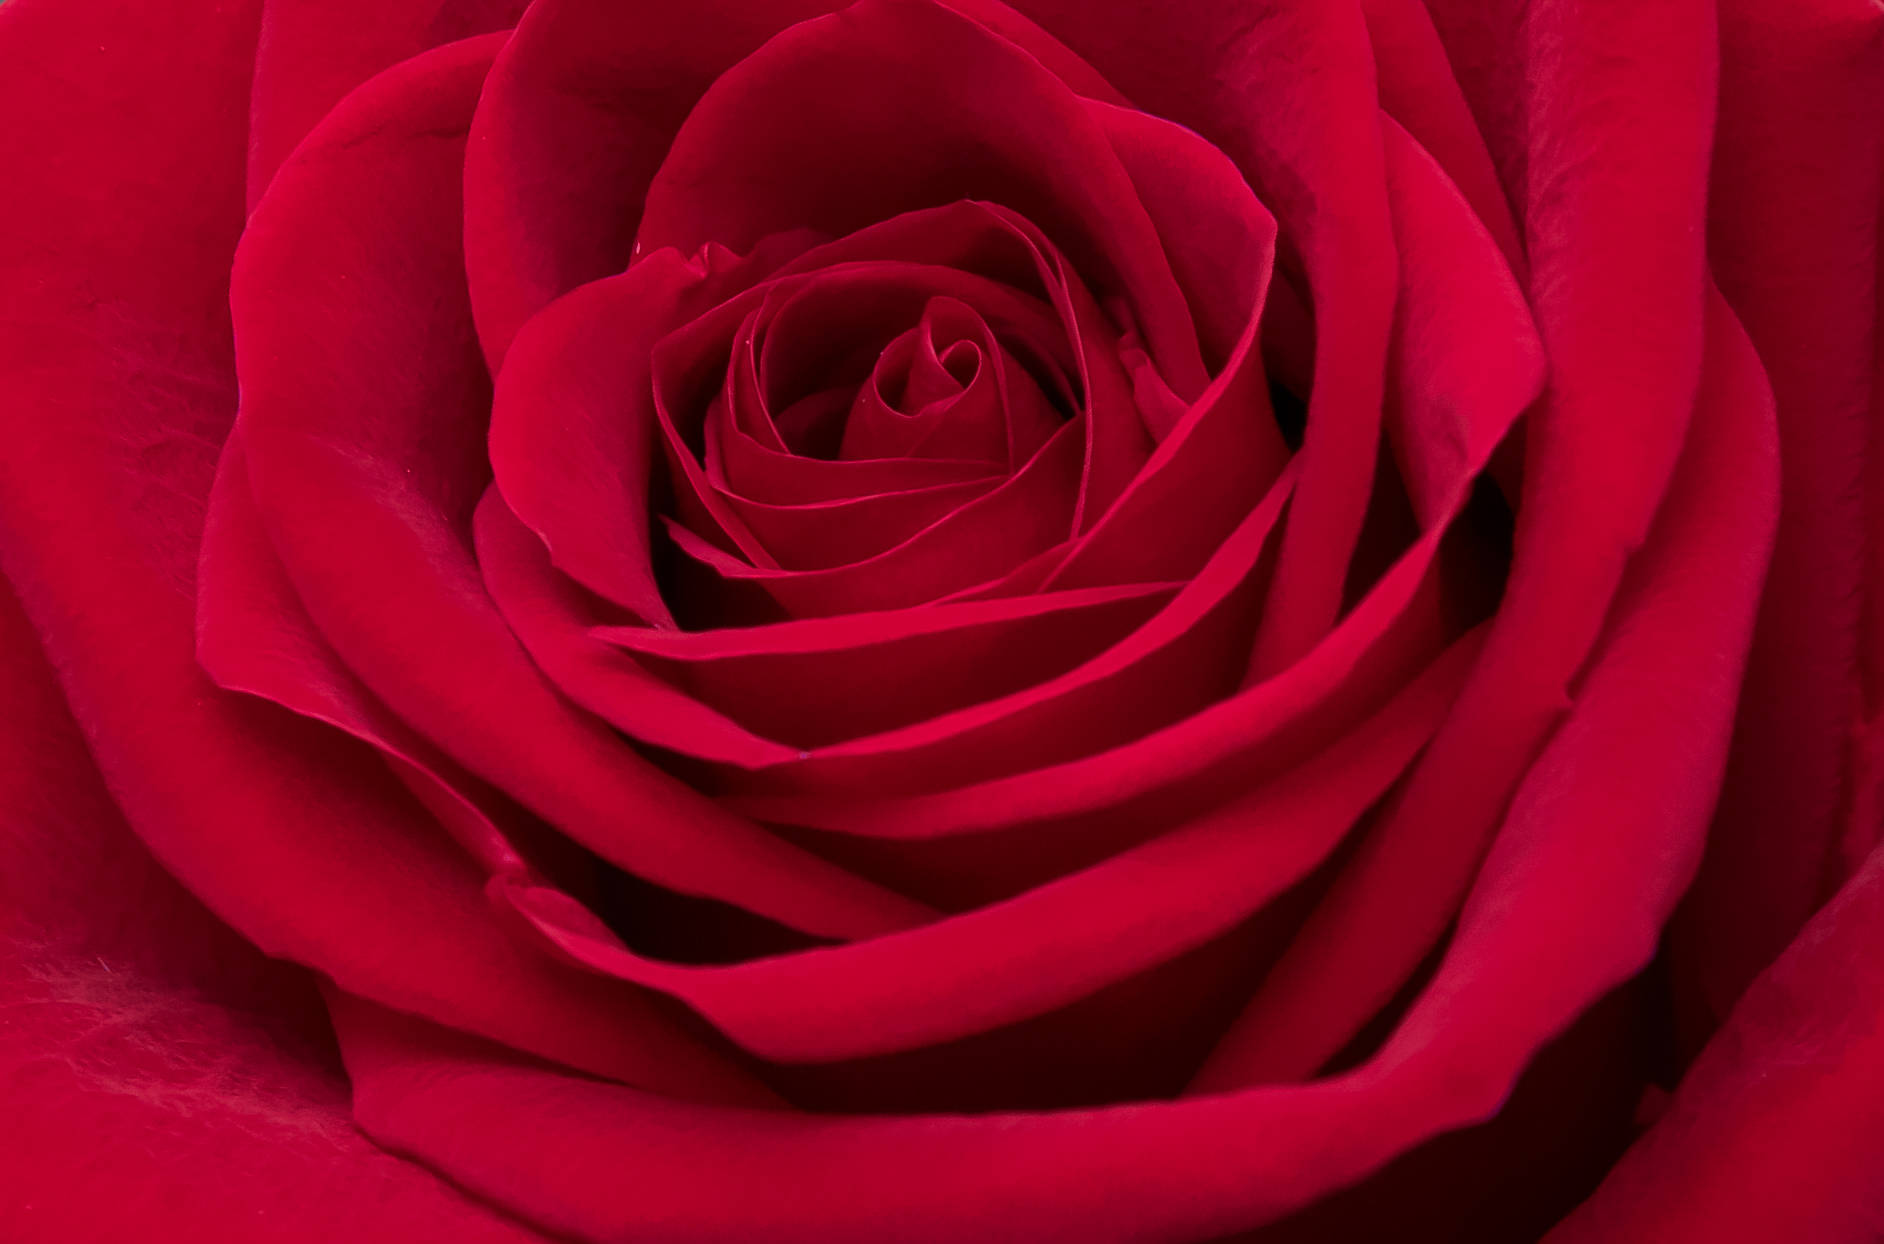 Aesthetic Rose Close-up Background